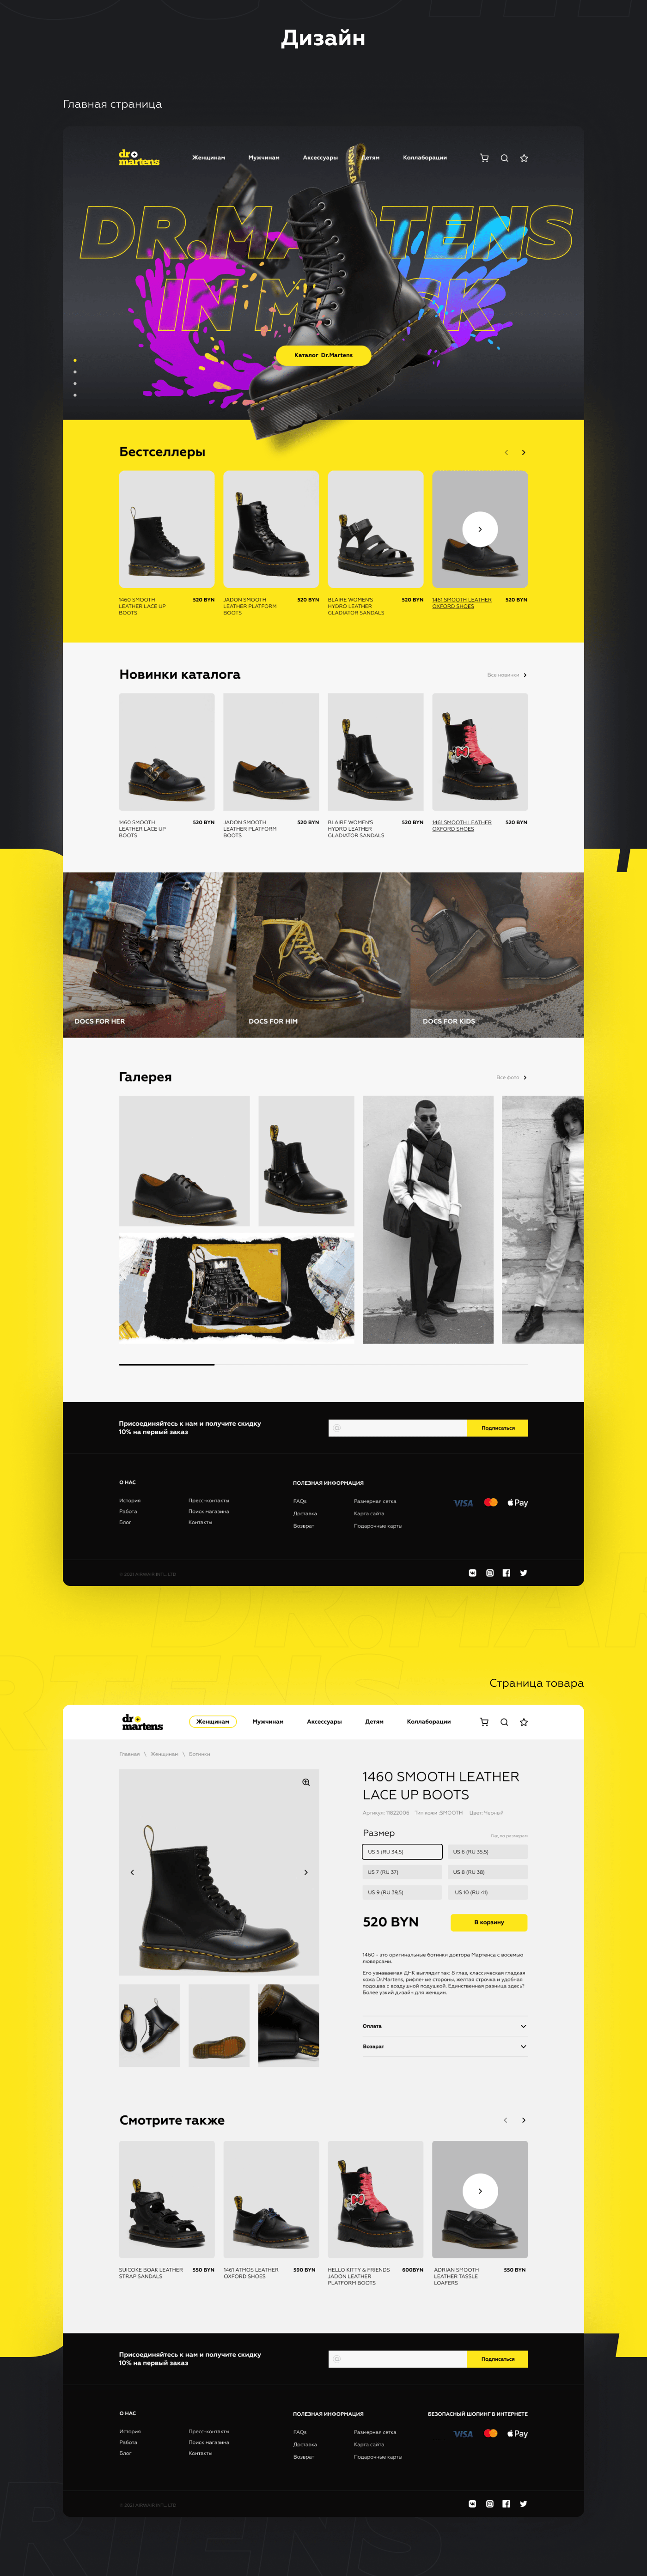 DrMartens   redesign shoes